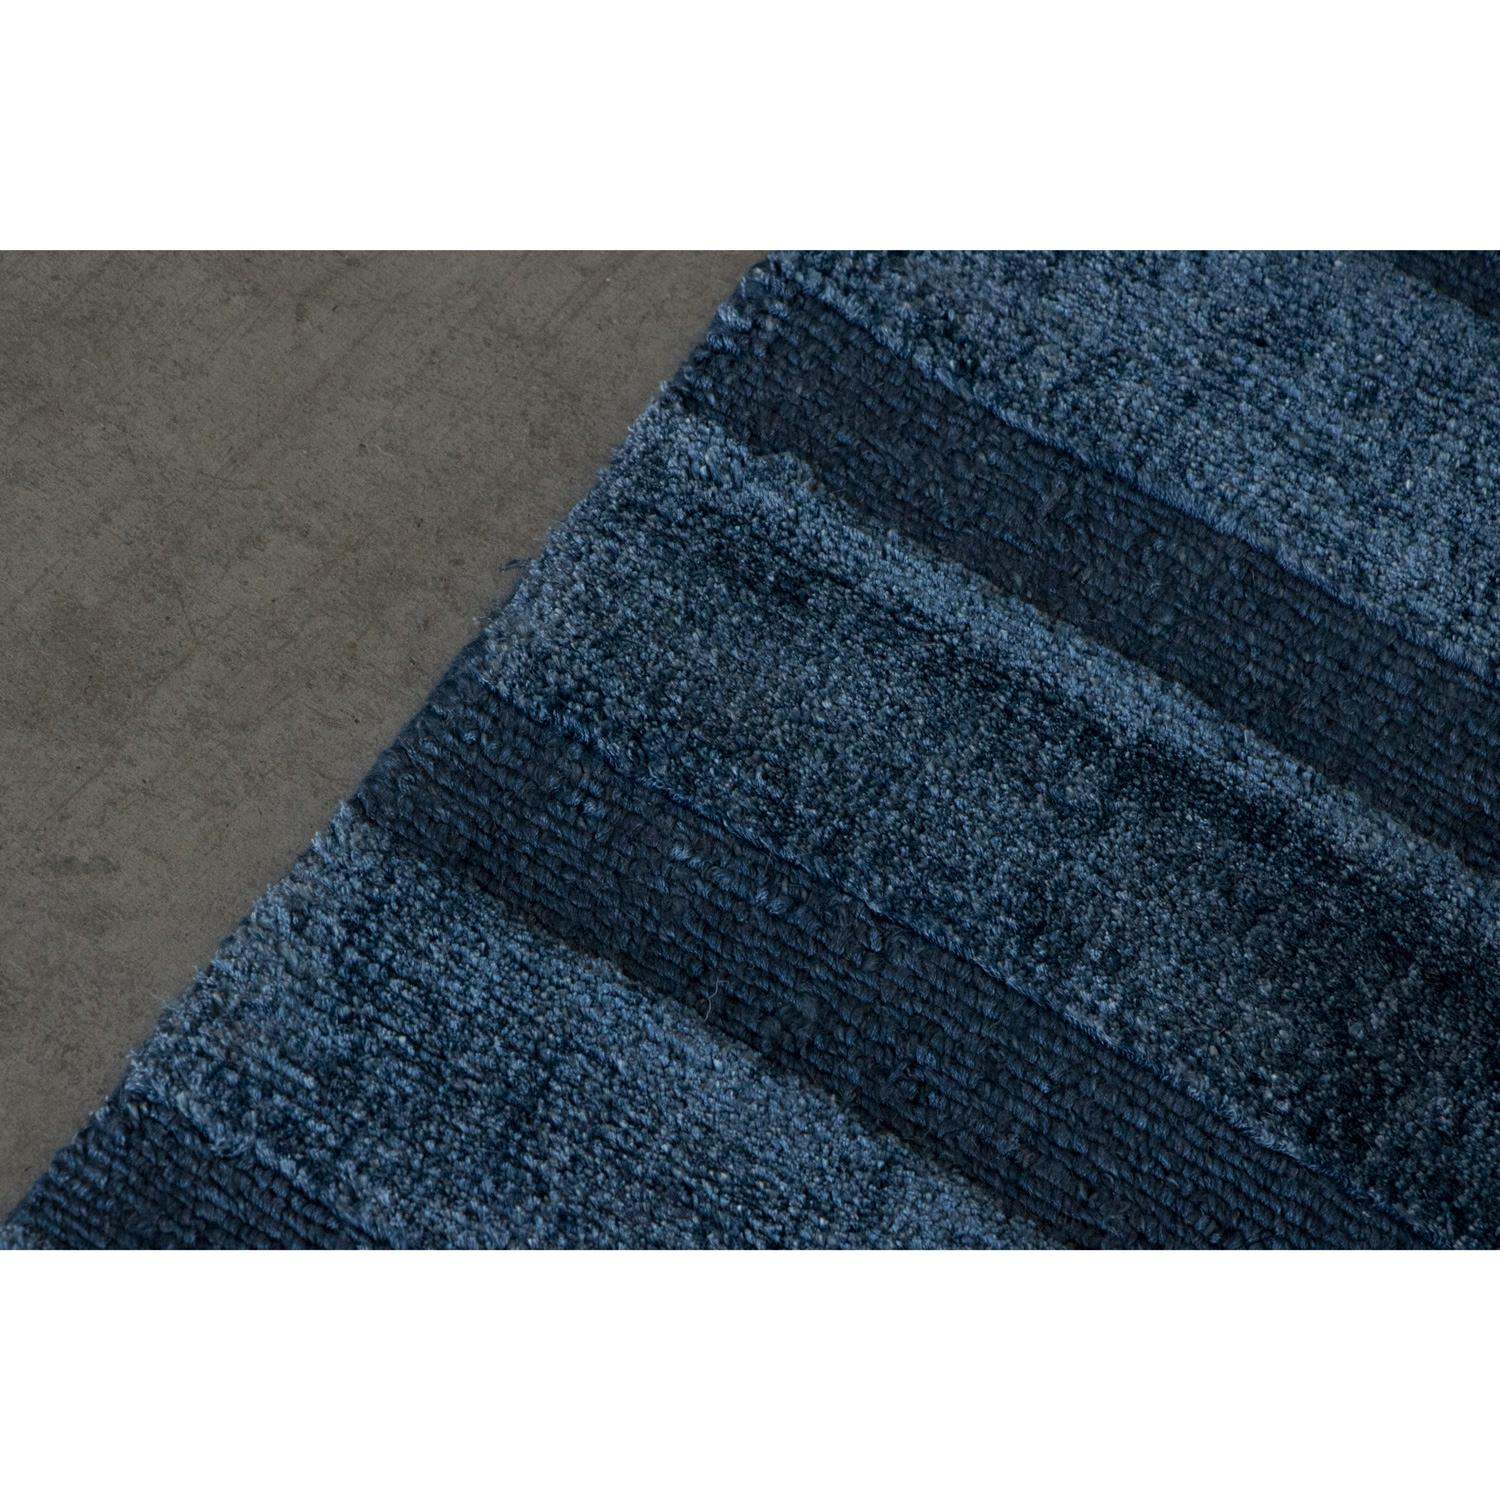 Hand-Woven 21st Cent Natural Striped Spring Blue Rug by Deanna Comellini In Stock 250x350cm For Sale